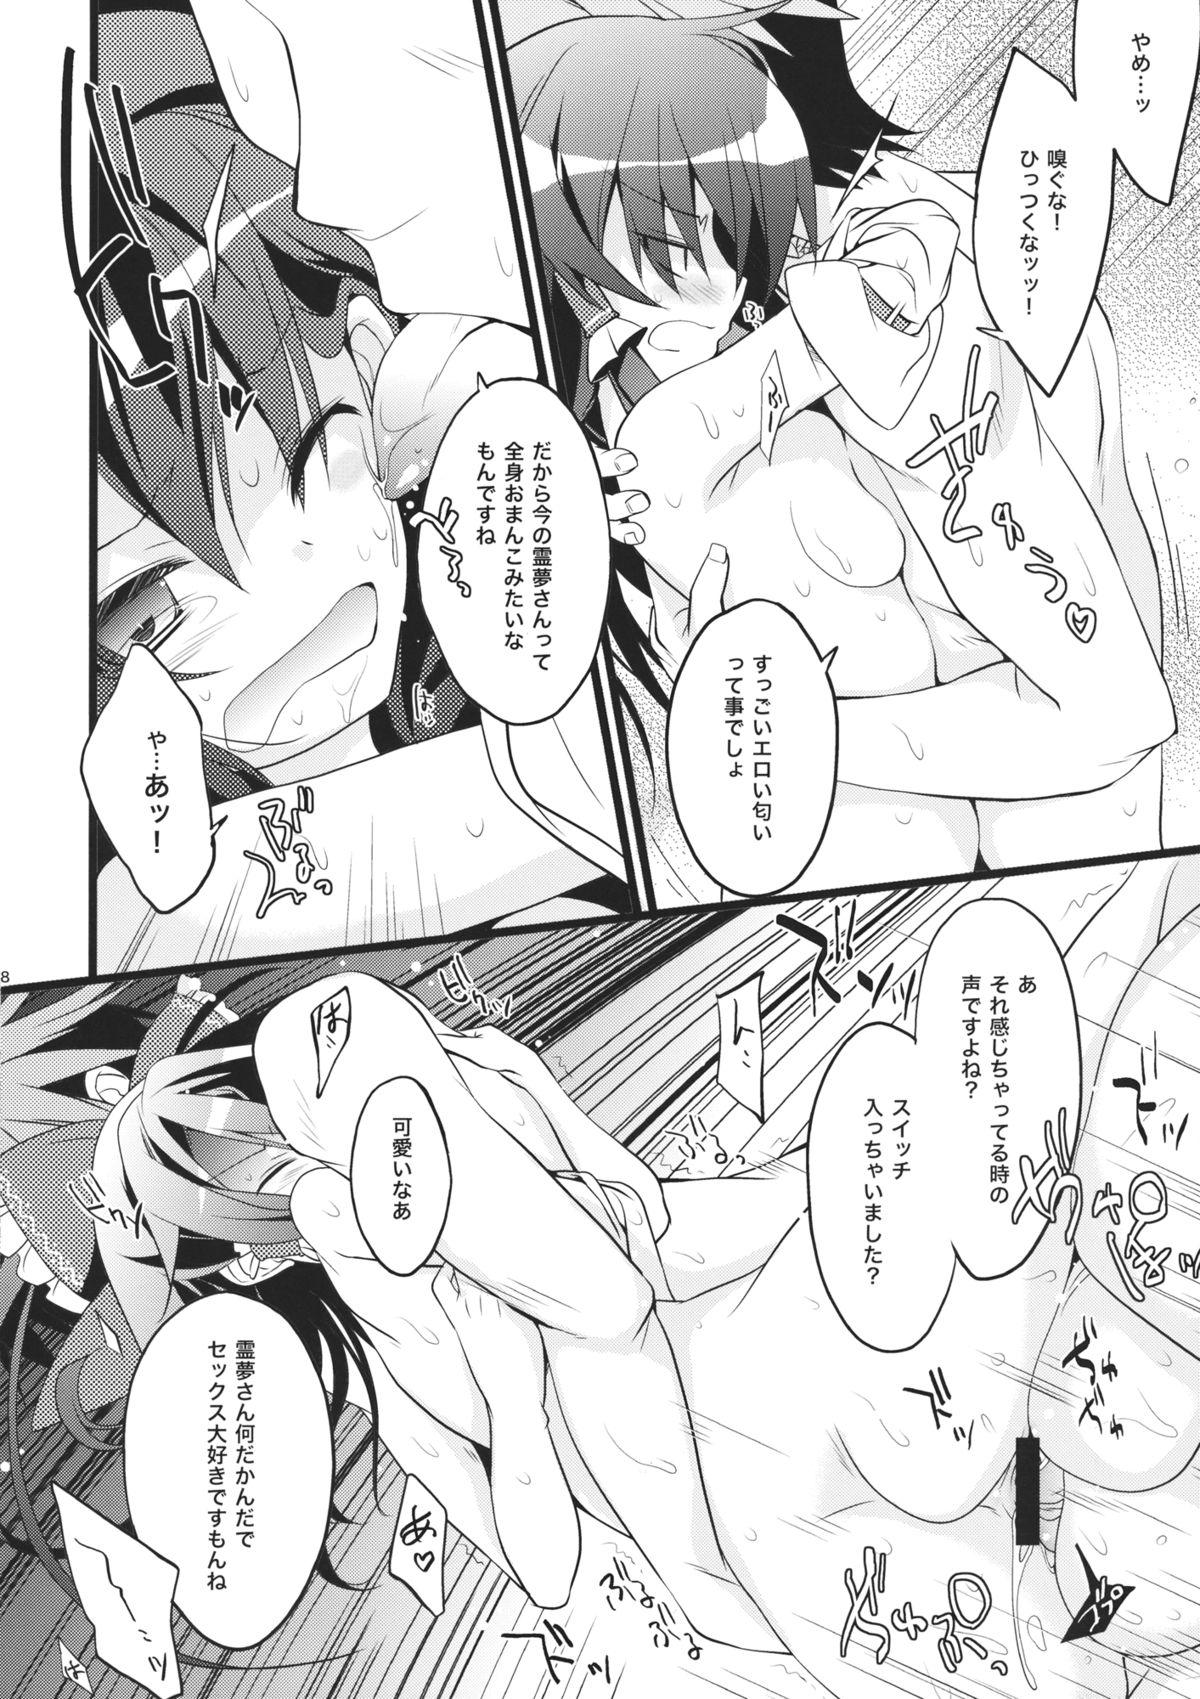 Tongue SUMMER SUMMER summer summer Go Go SUMMER-sex - Touhou project Tease - Page 7